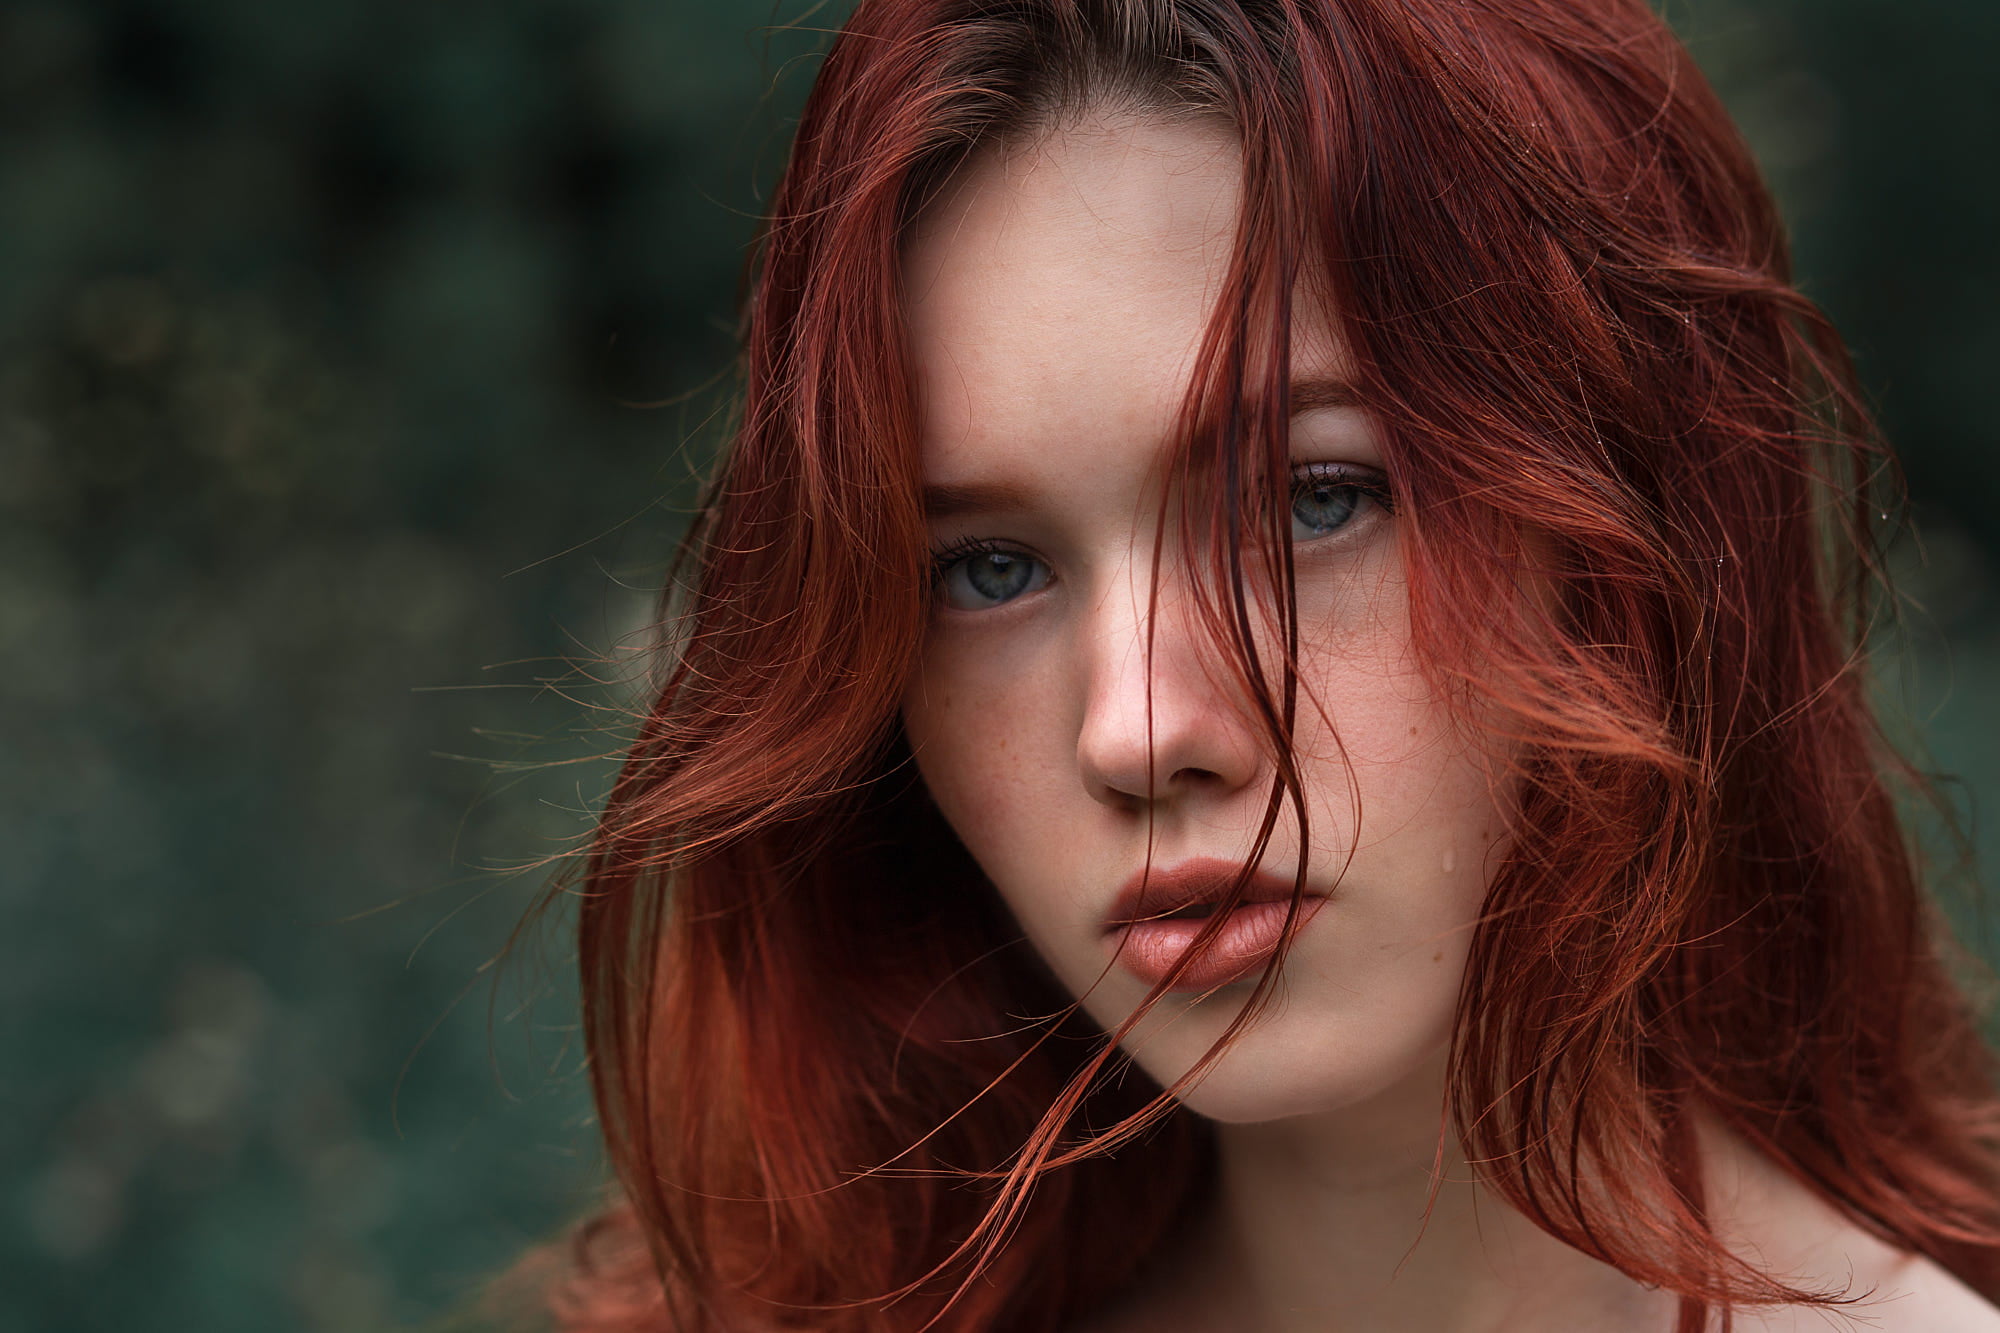 red haired woman, woman's face, women, redhead, blue eyes, hair in face